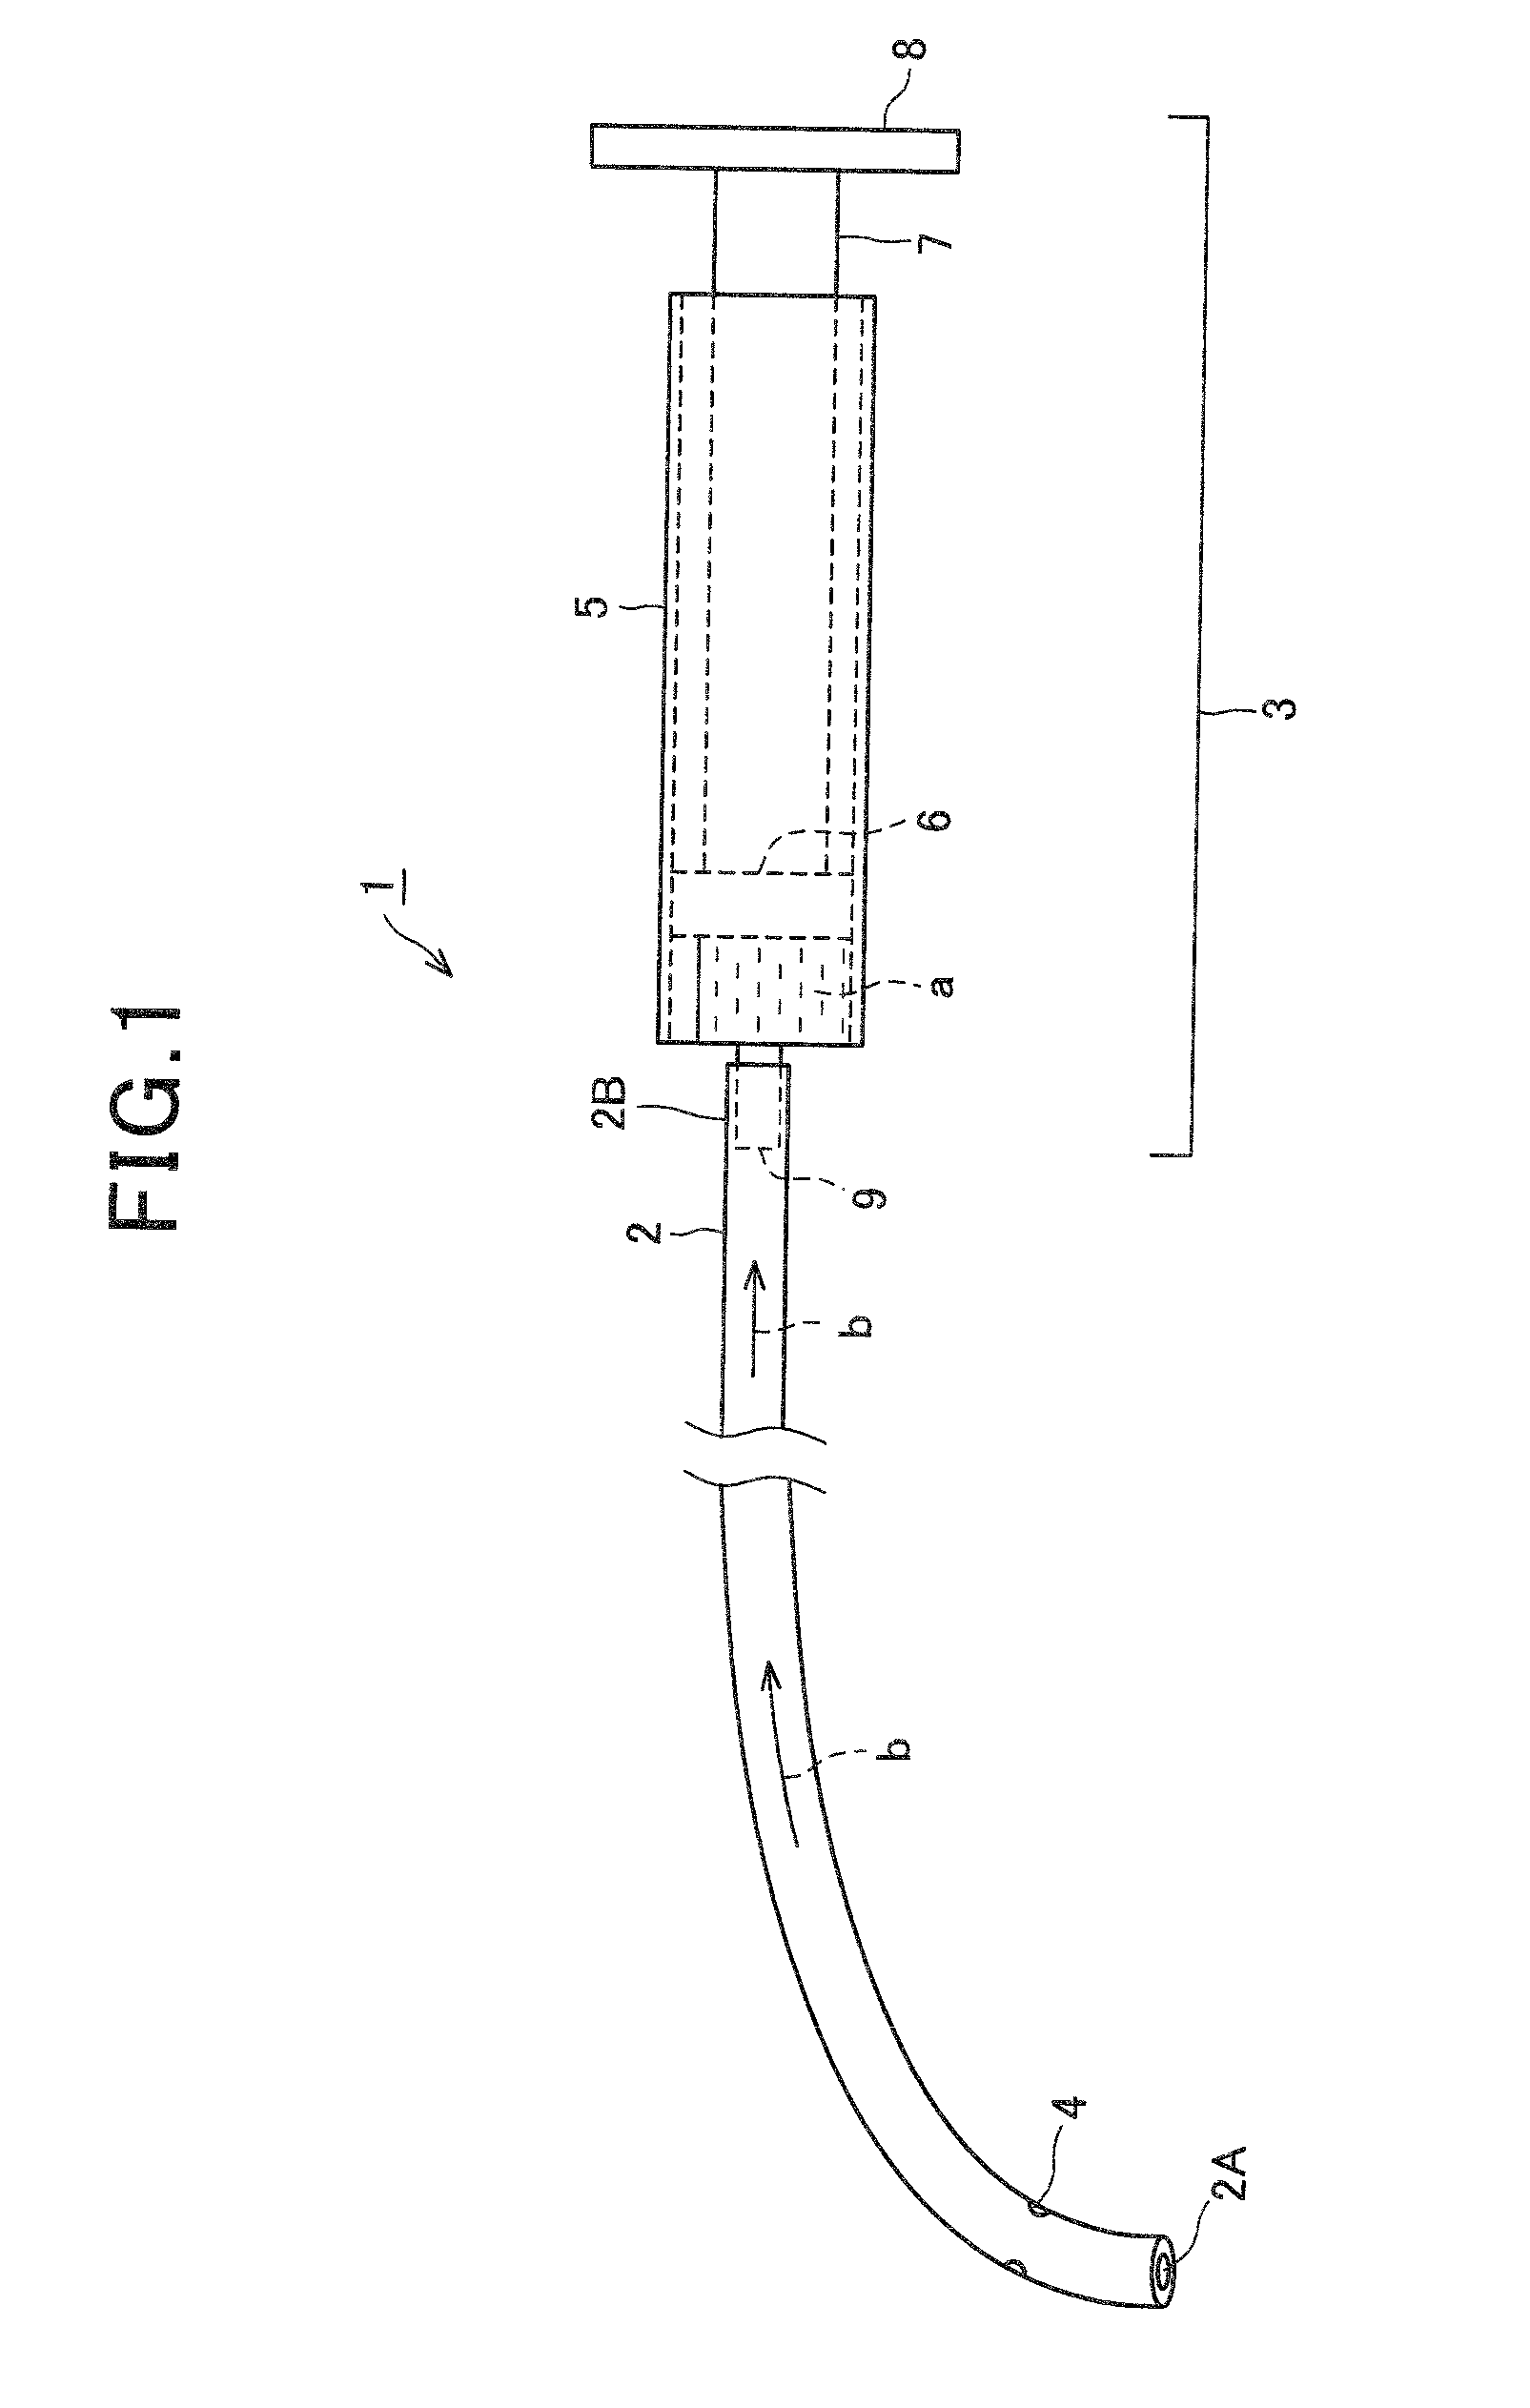 Method of collecting duodenal specimen to detect upper digestive system disease without using pancreatic or bile stimulant